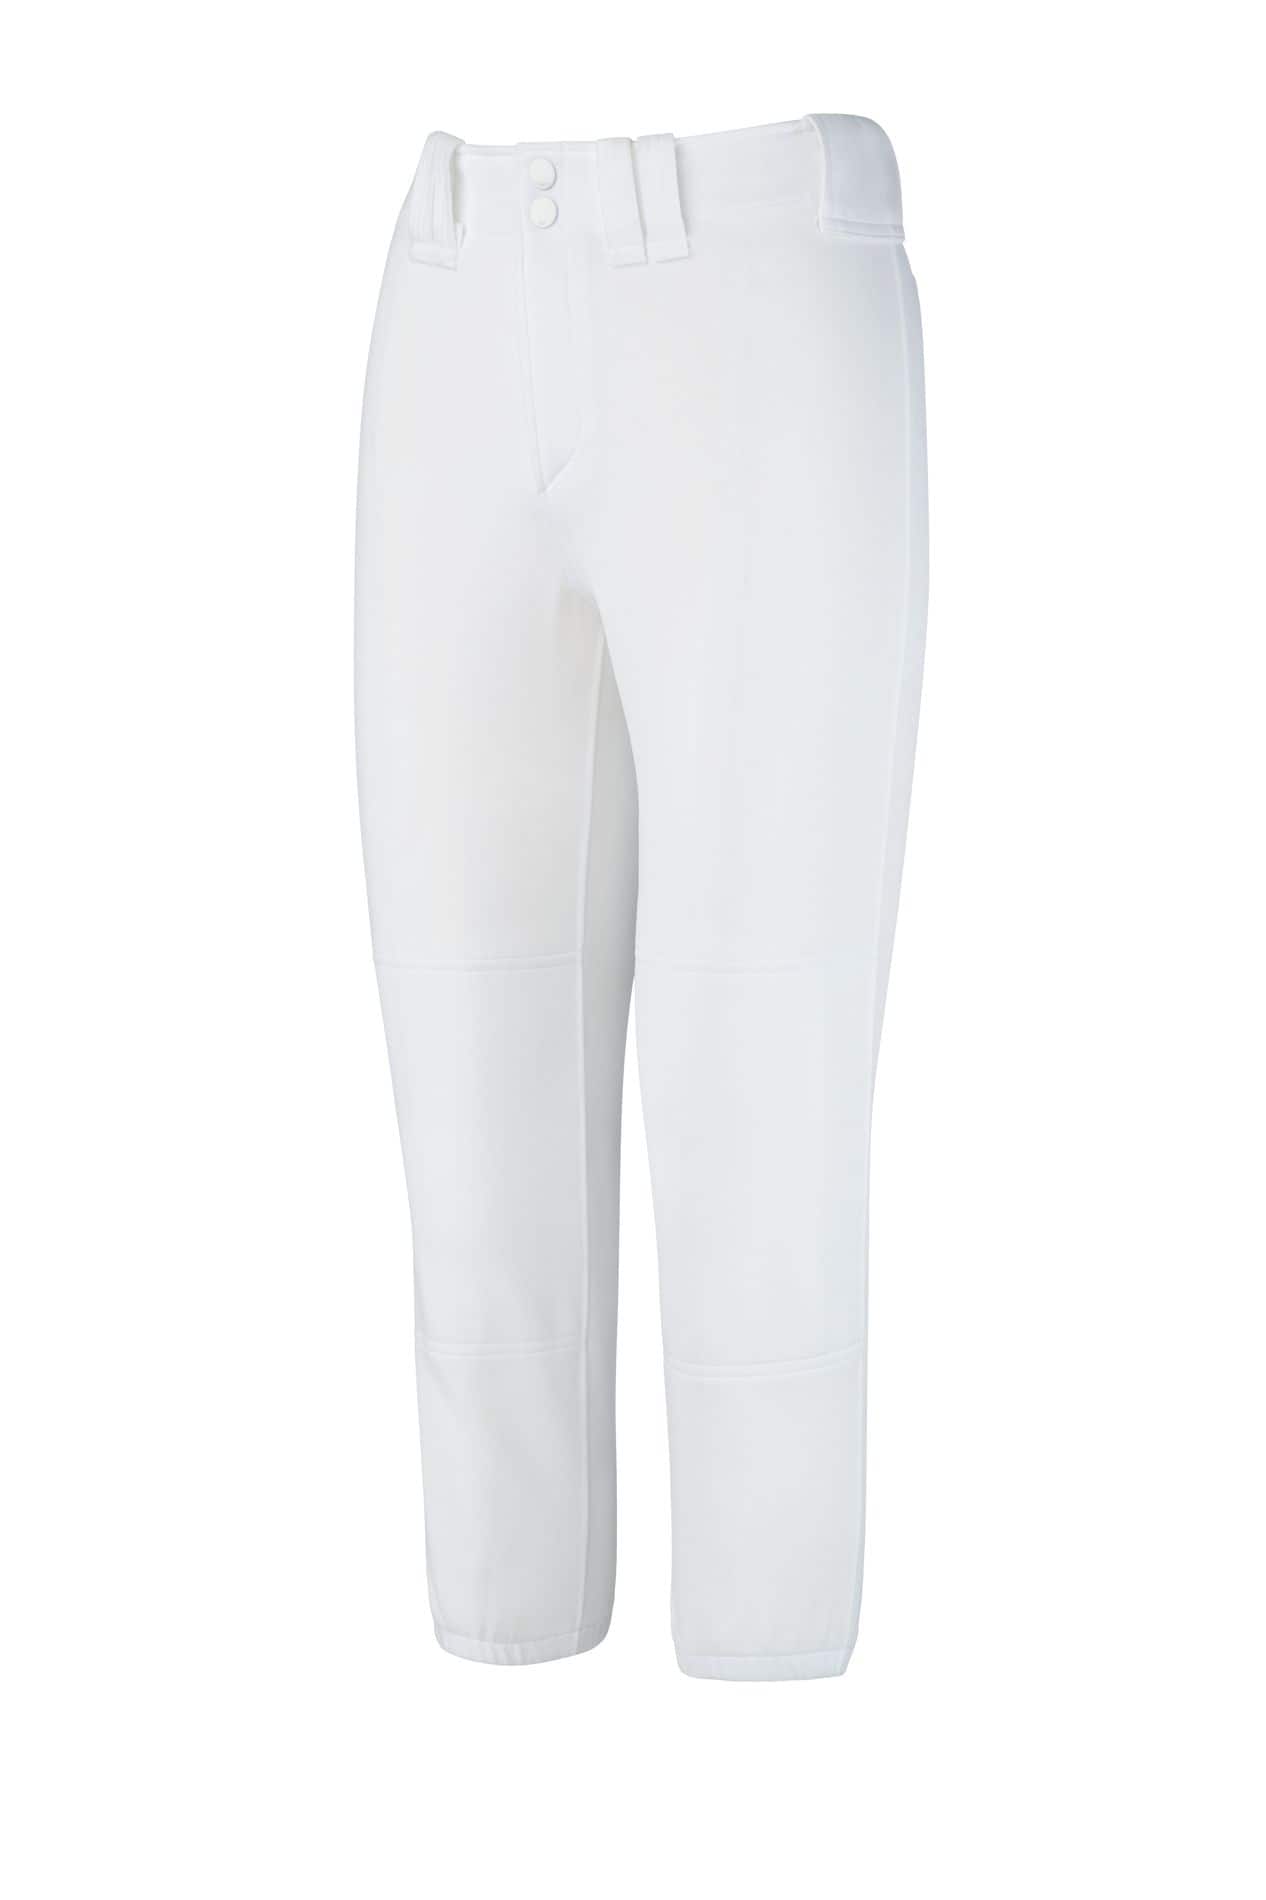 Mizuno Women S Belted Softball Pant White Extra Small Ec842952 5529 41d7 9548 1b370df9d7f7 Jpgrendition 